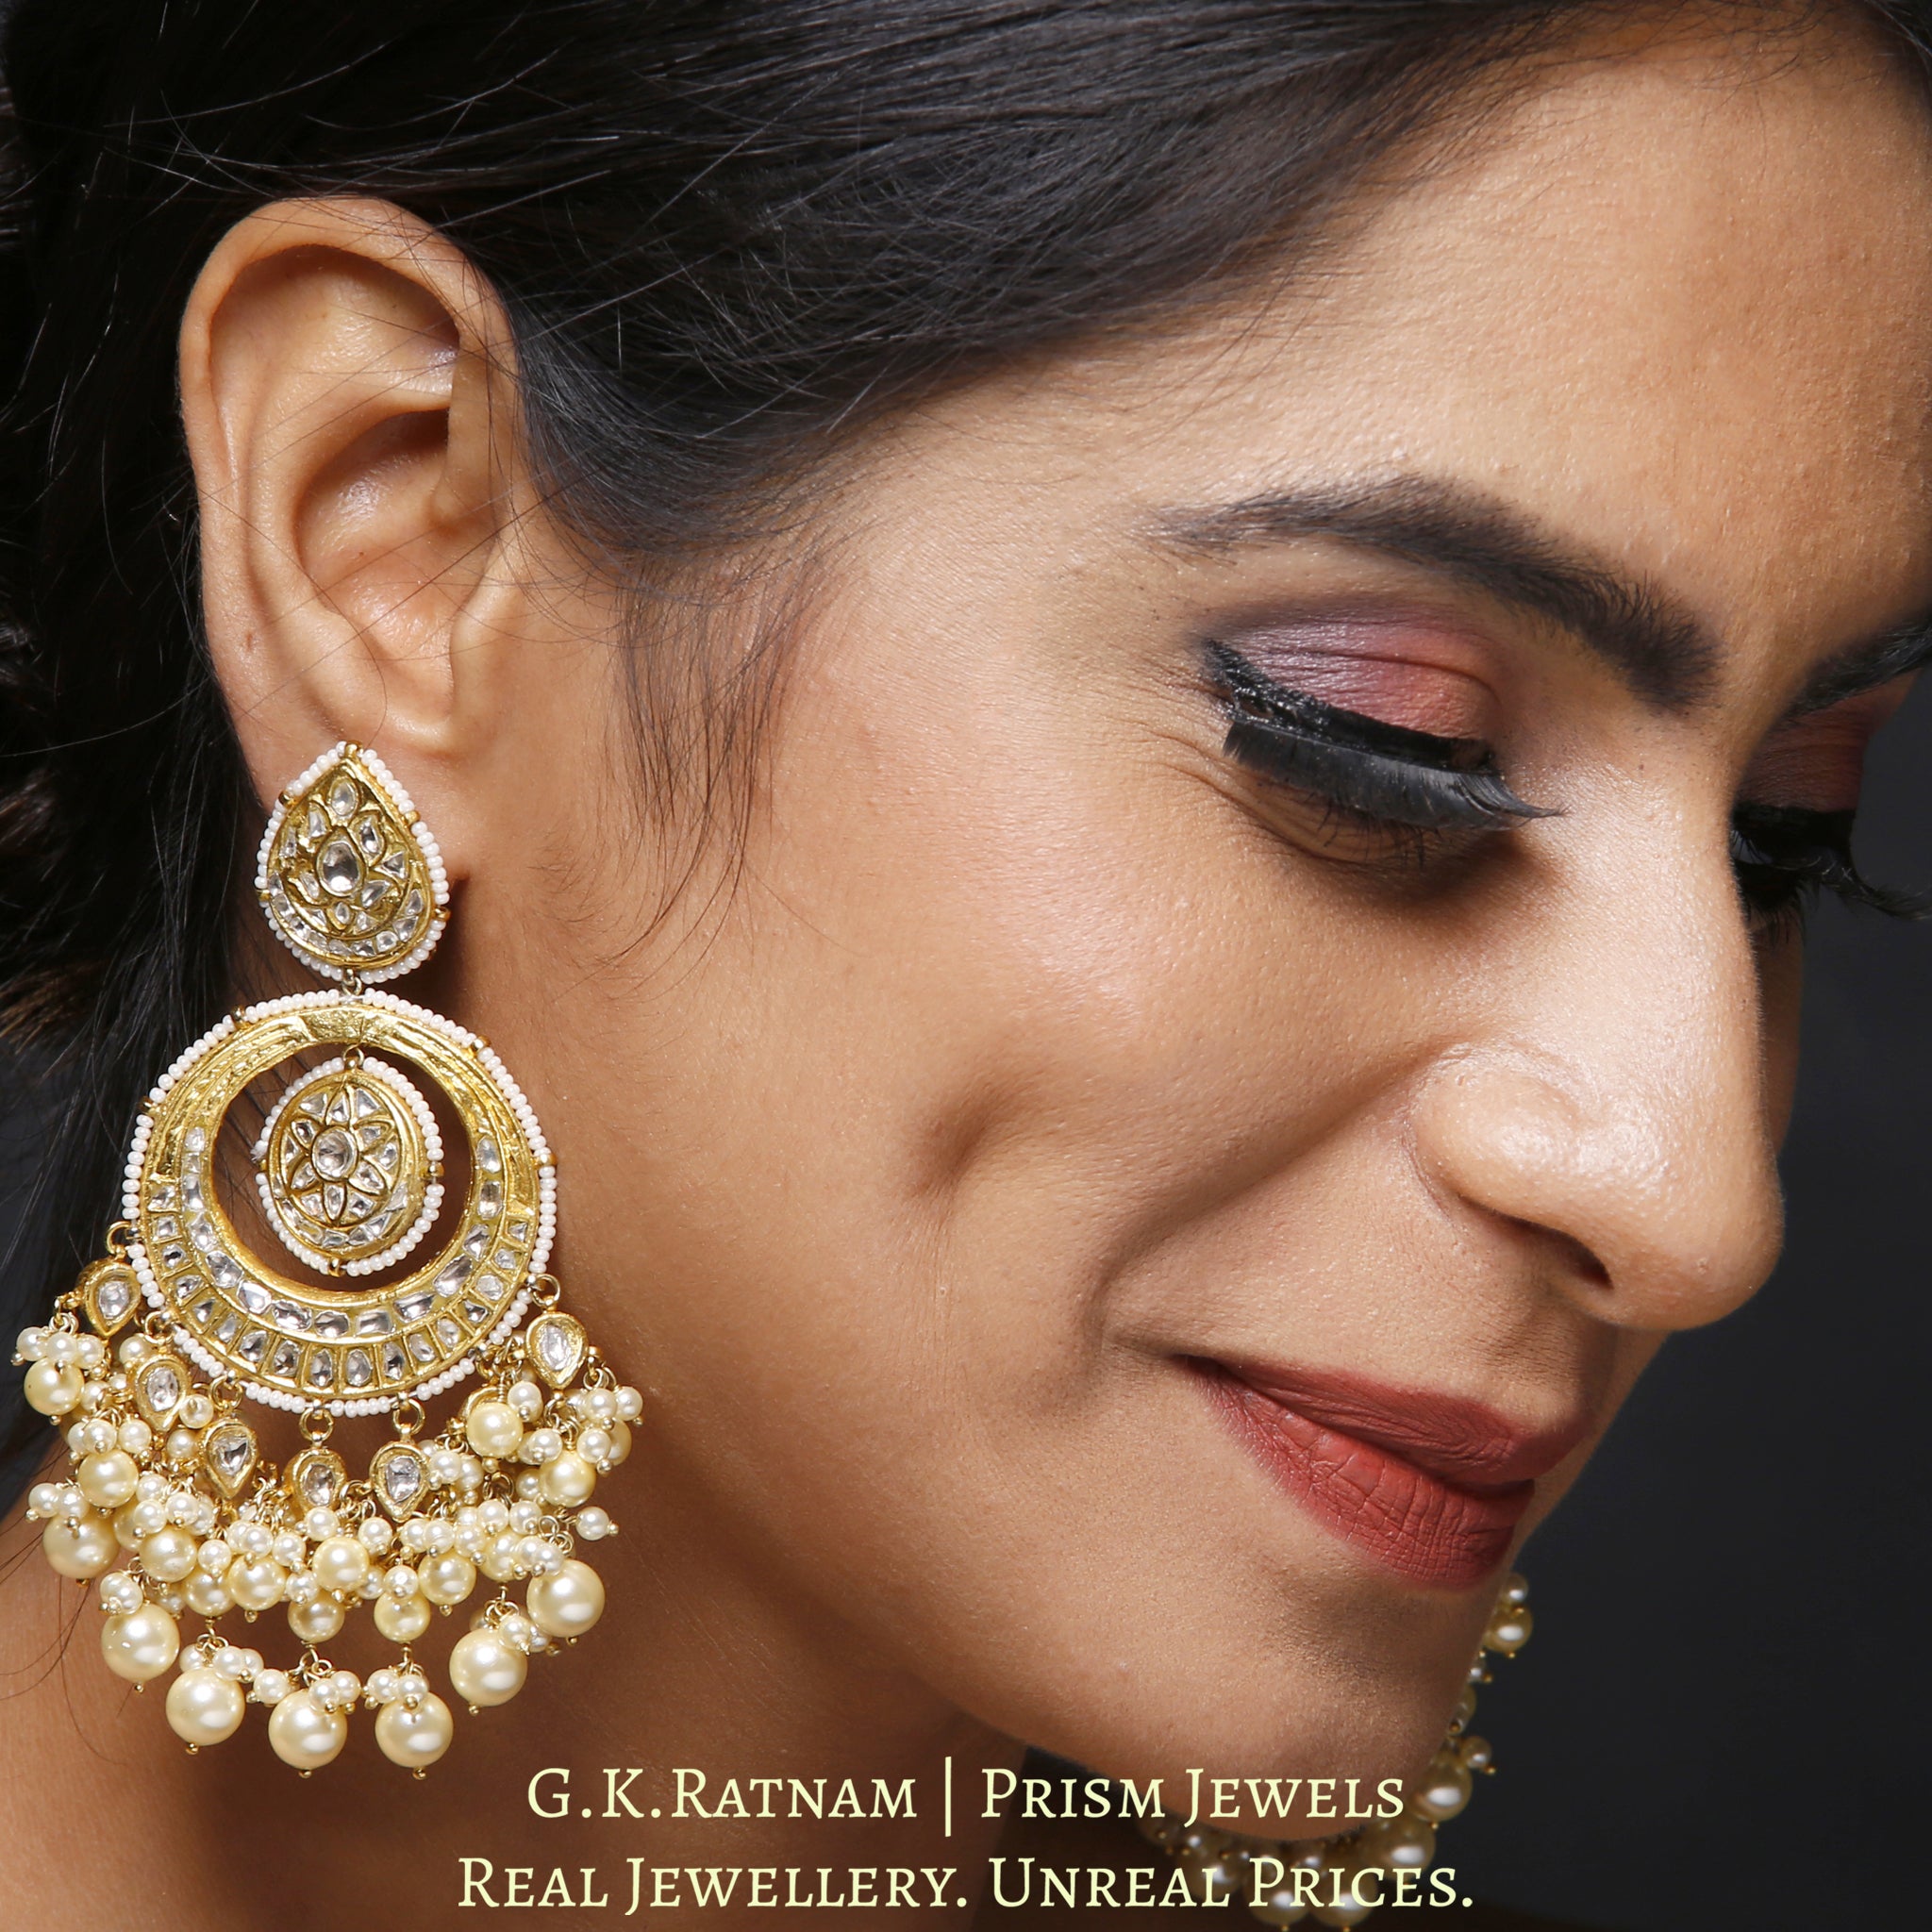 23k Gold and Diamond Polki Chand Bali Earring Pair enhanced with lustrous pearls